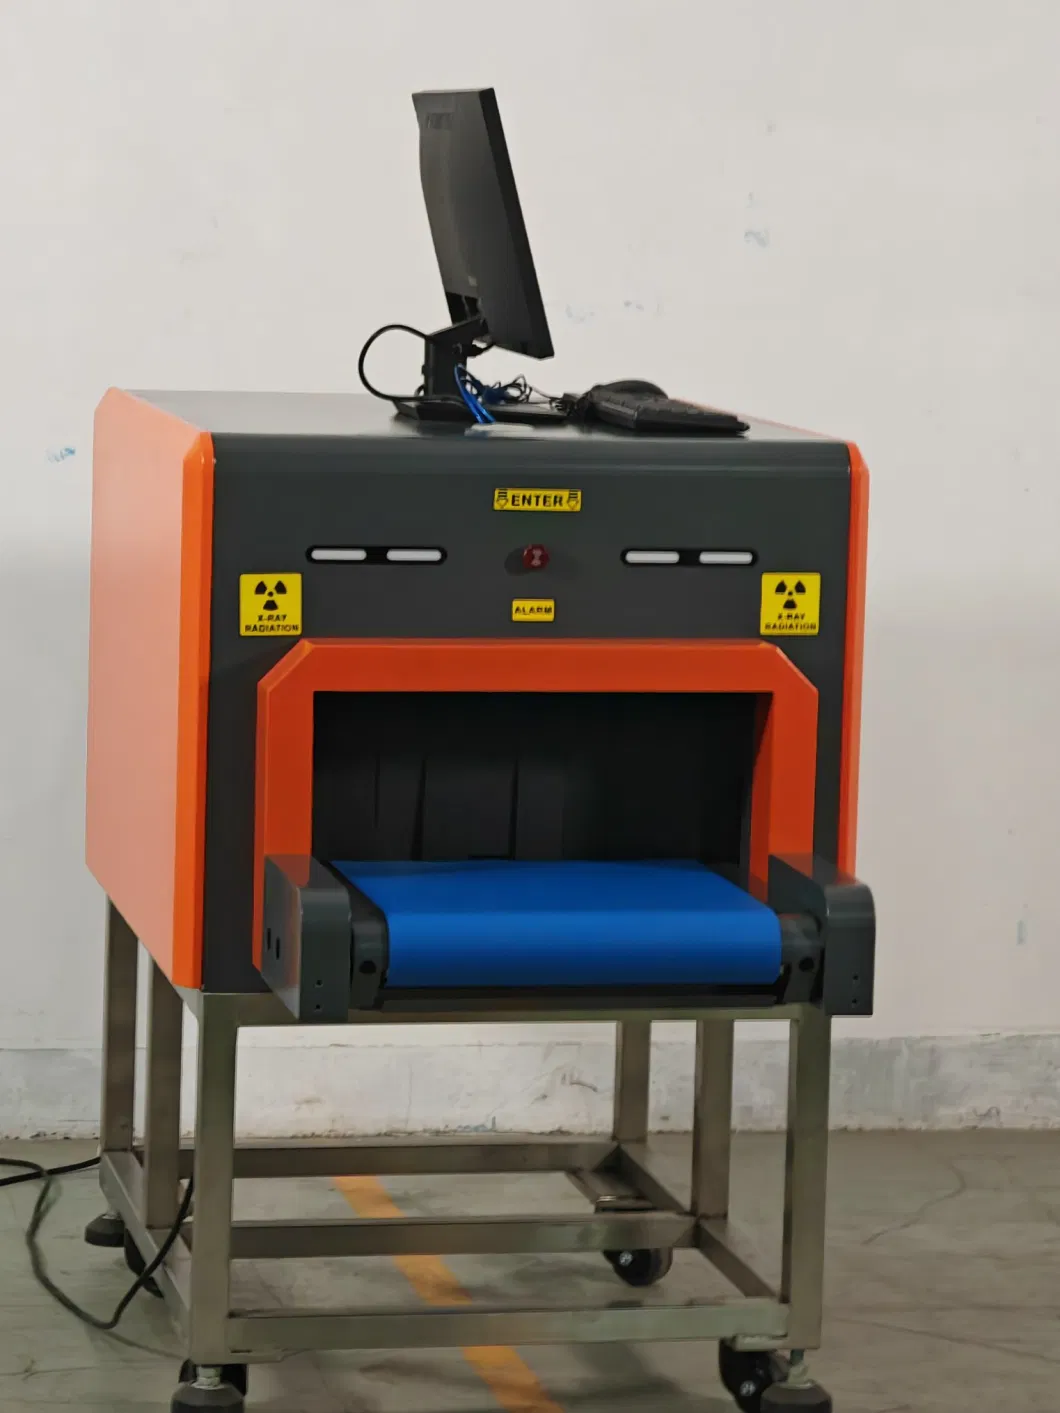 Commercial X-ray Bag Scanner 4233 for School Baggage Screening